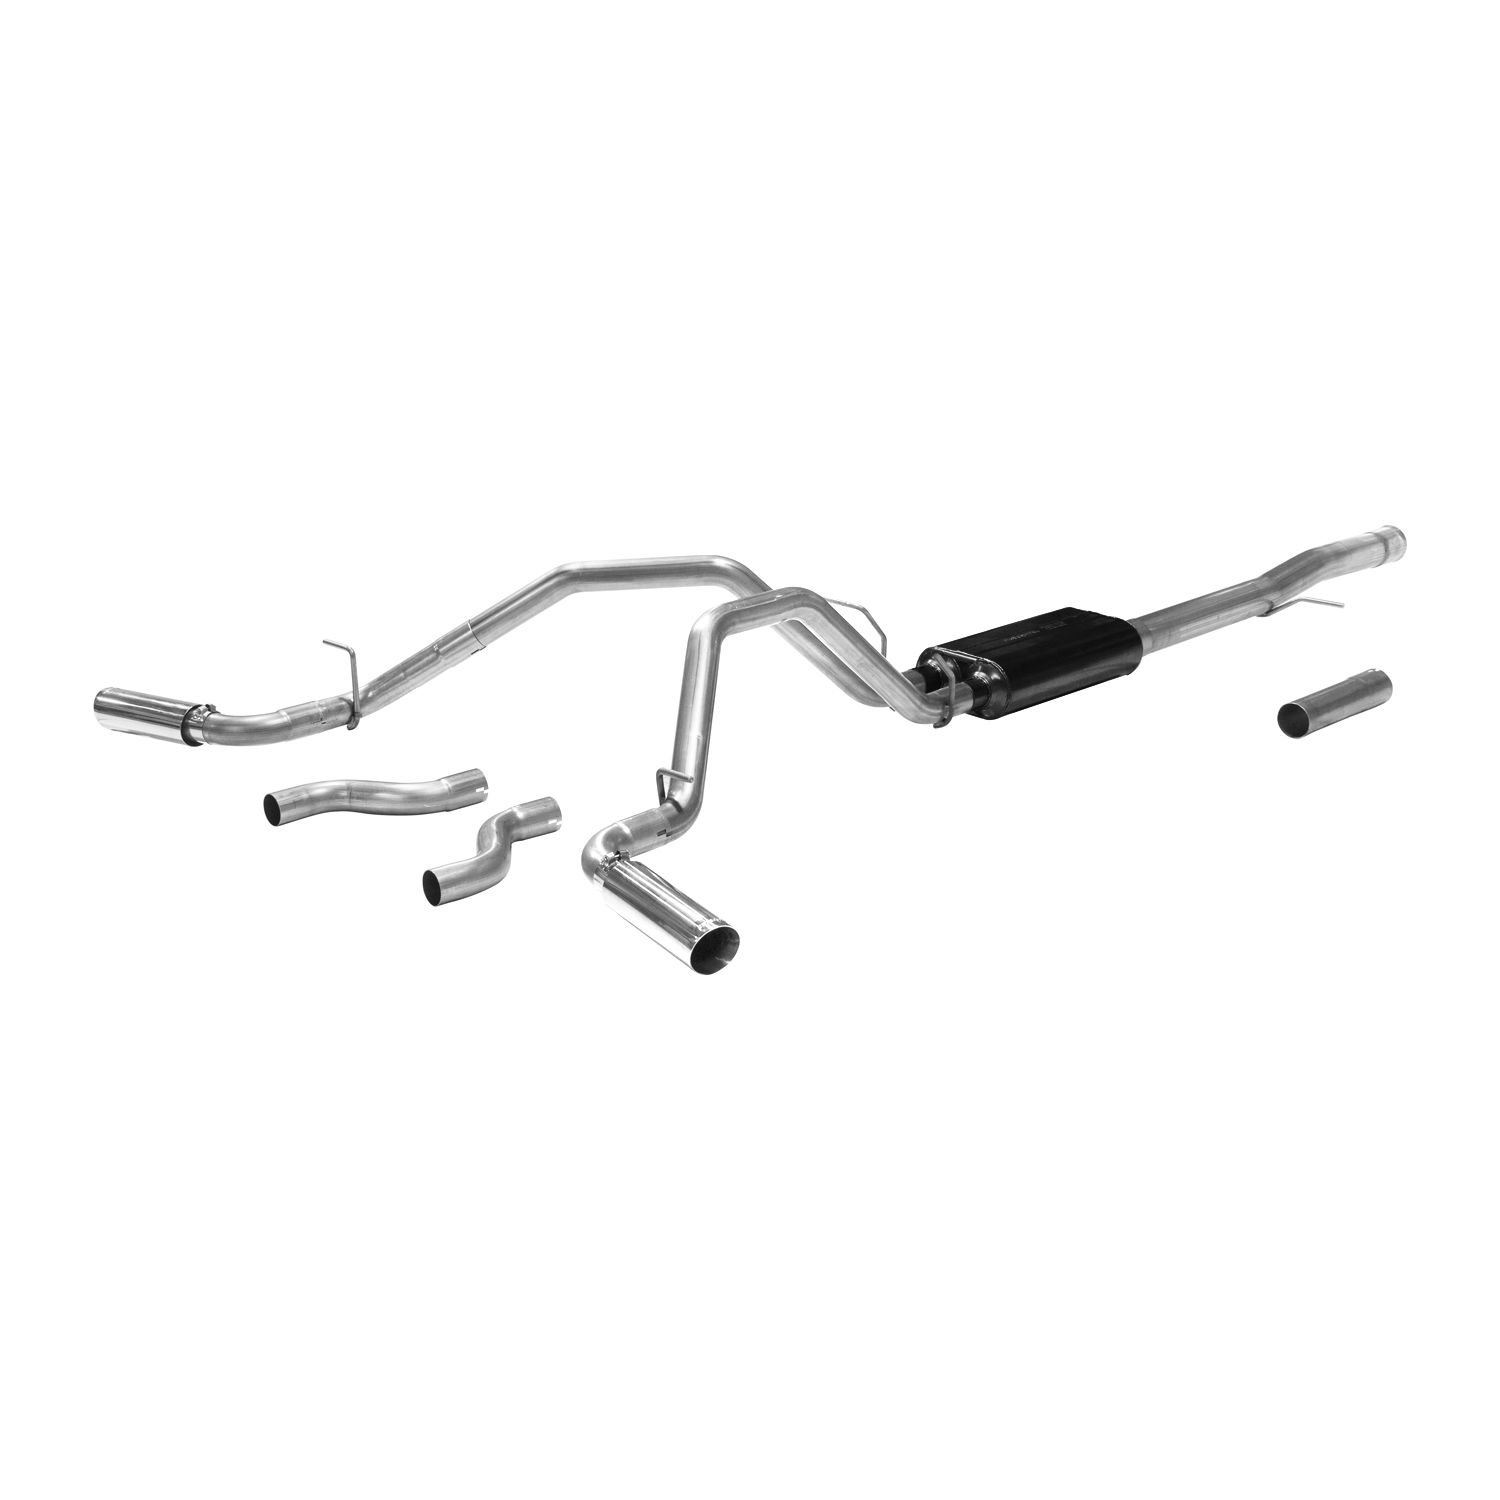 2011-2018 GMC Sierra 1500 SLT 6.2L EXT Cab Flowmaster American Thunder Cat-Back Exhaust 69.3 inch Bed